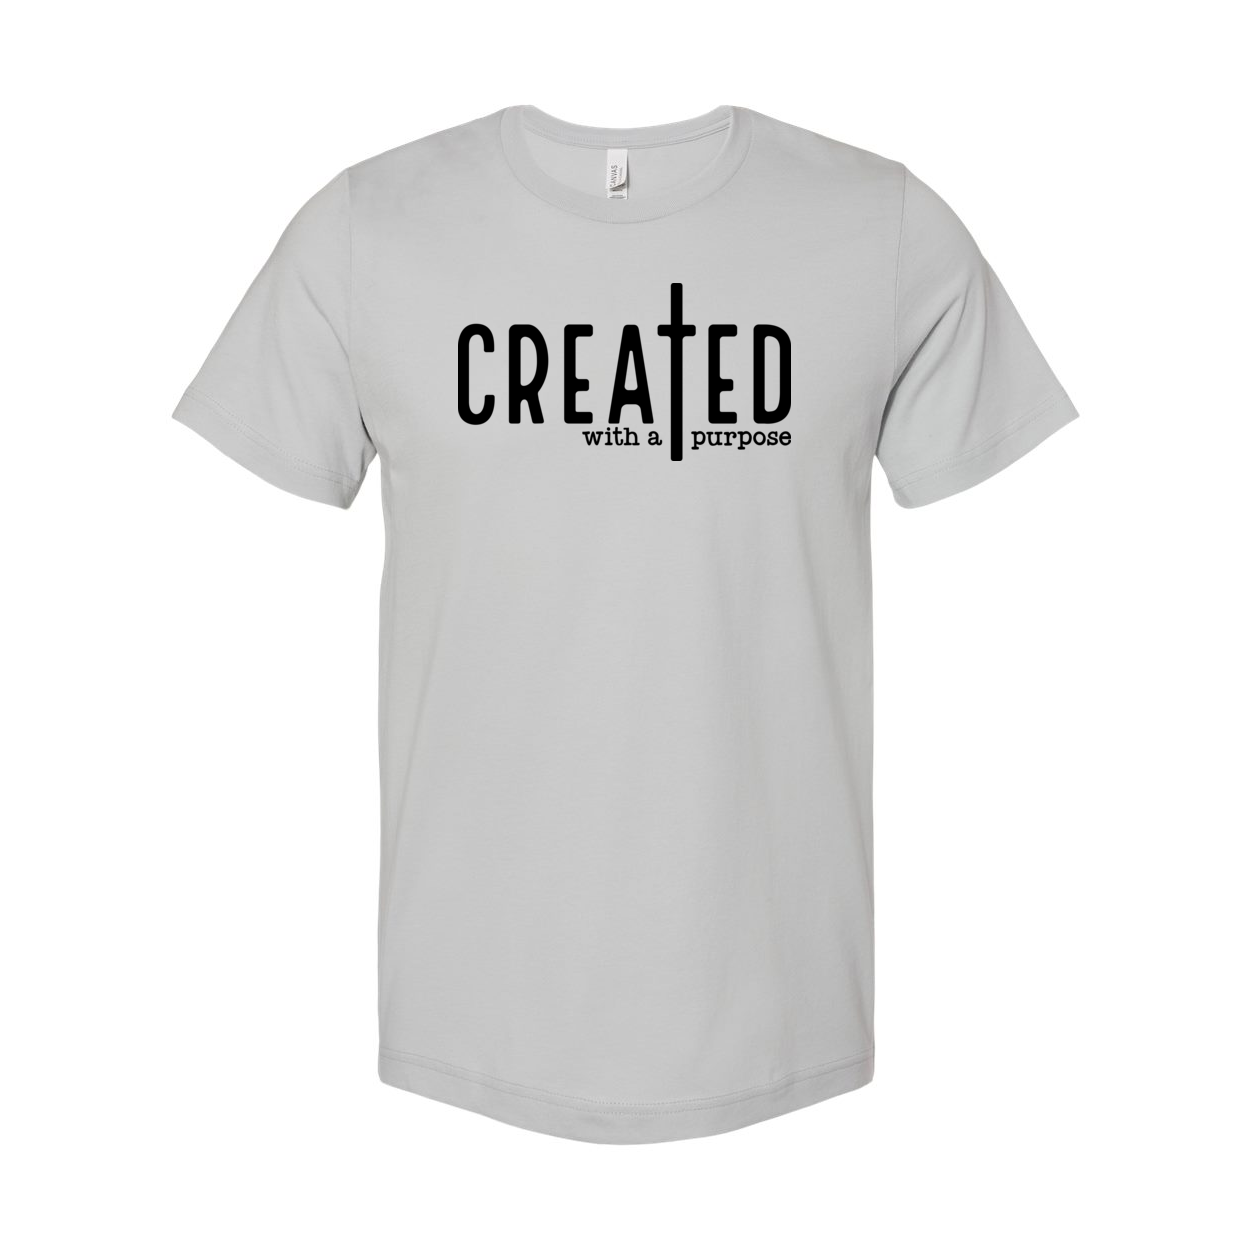 Created With a Purpose Tee